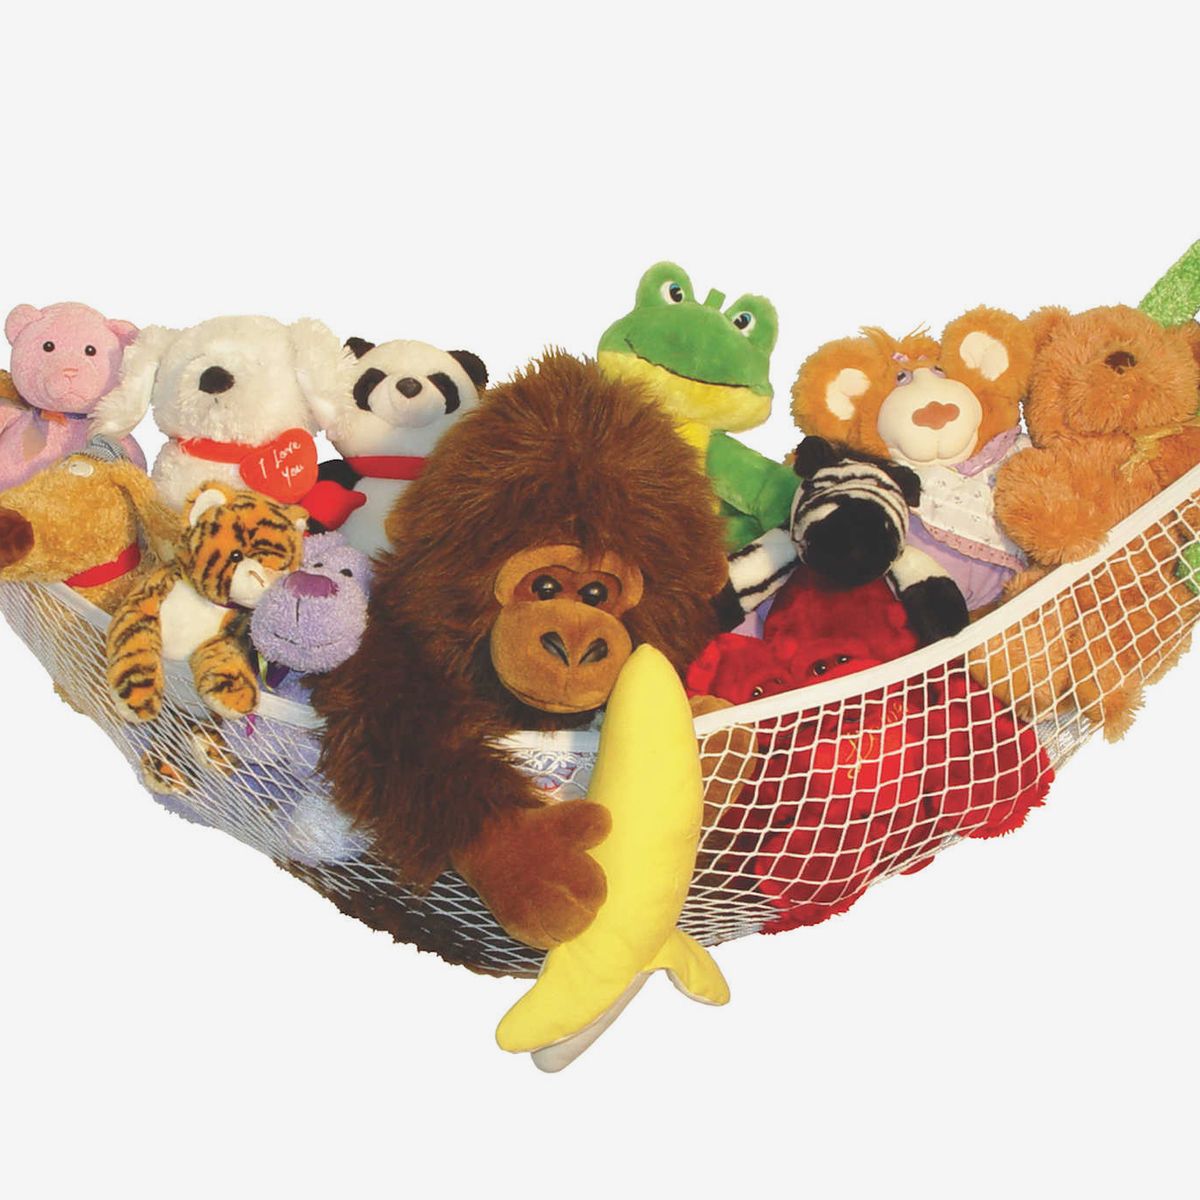 soft toy boxes